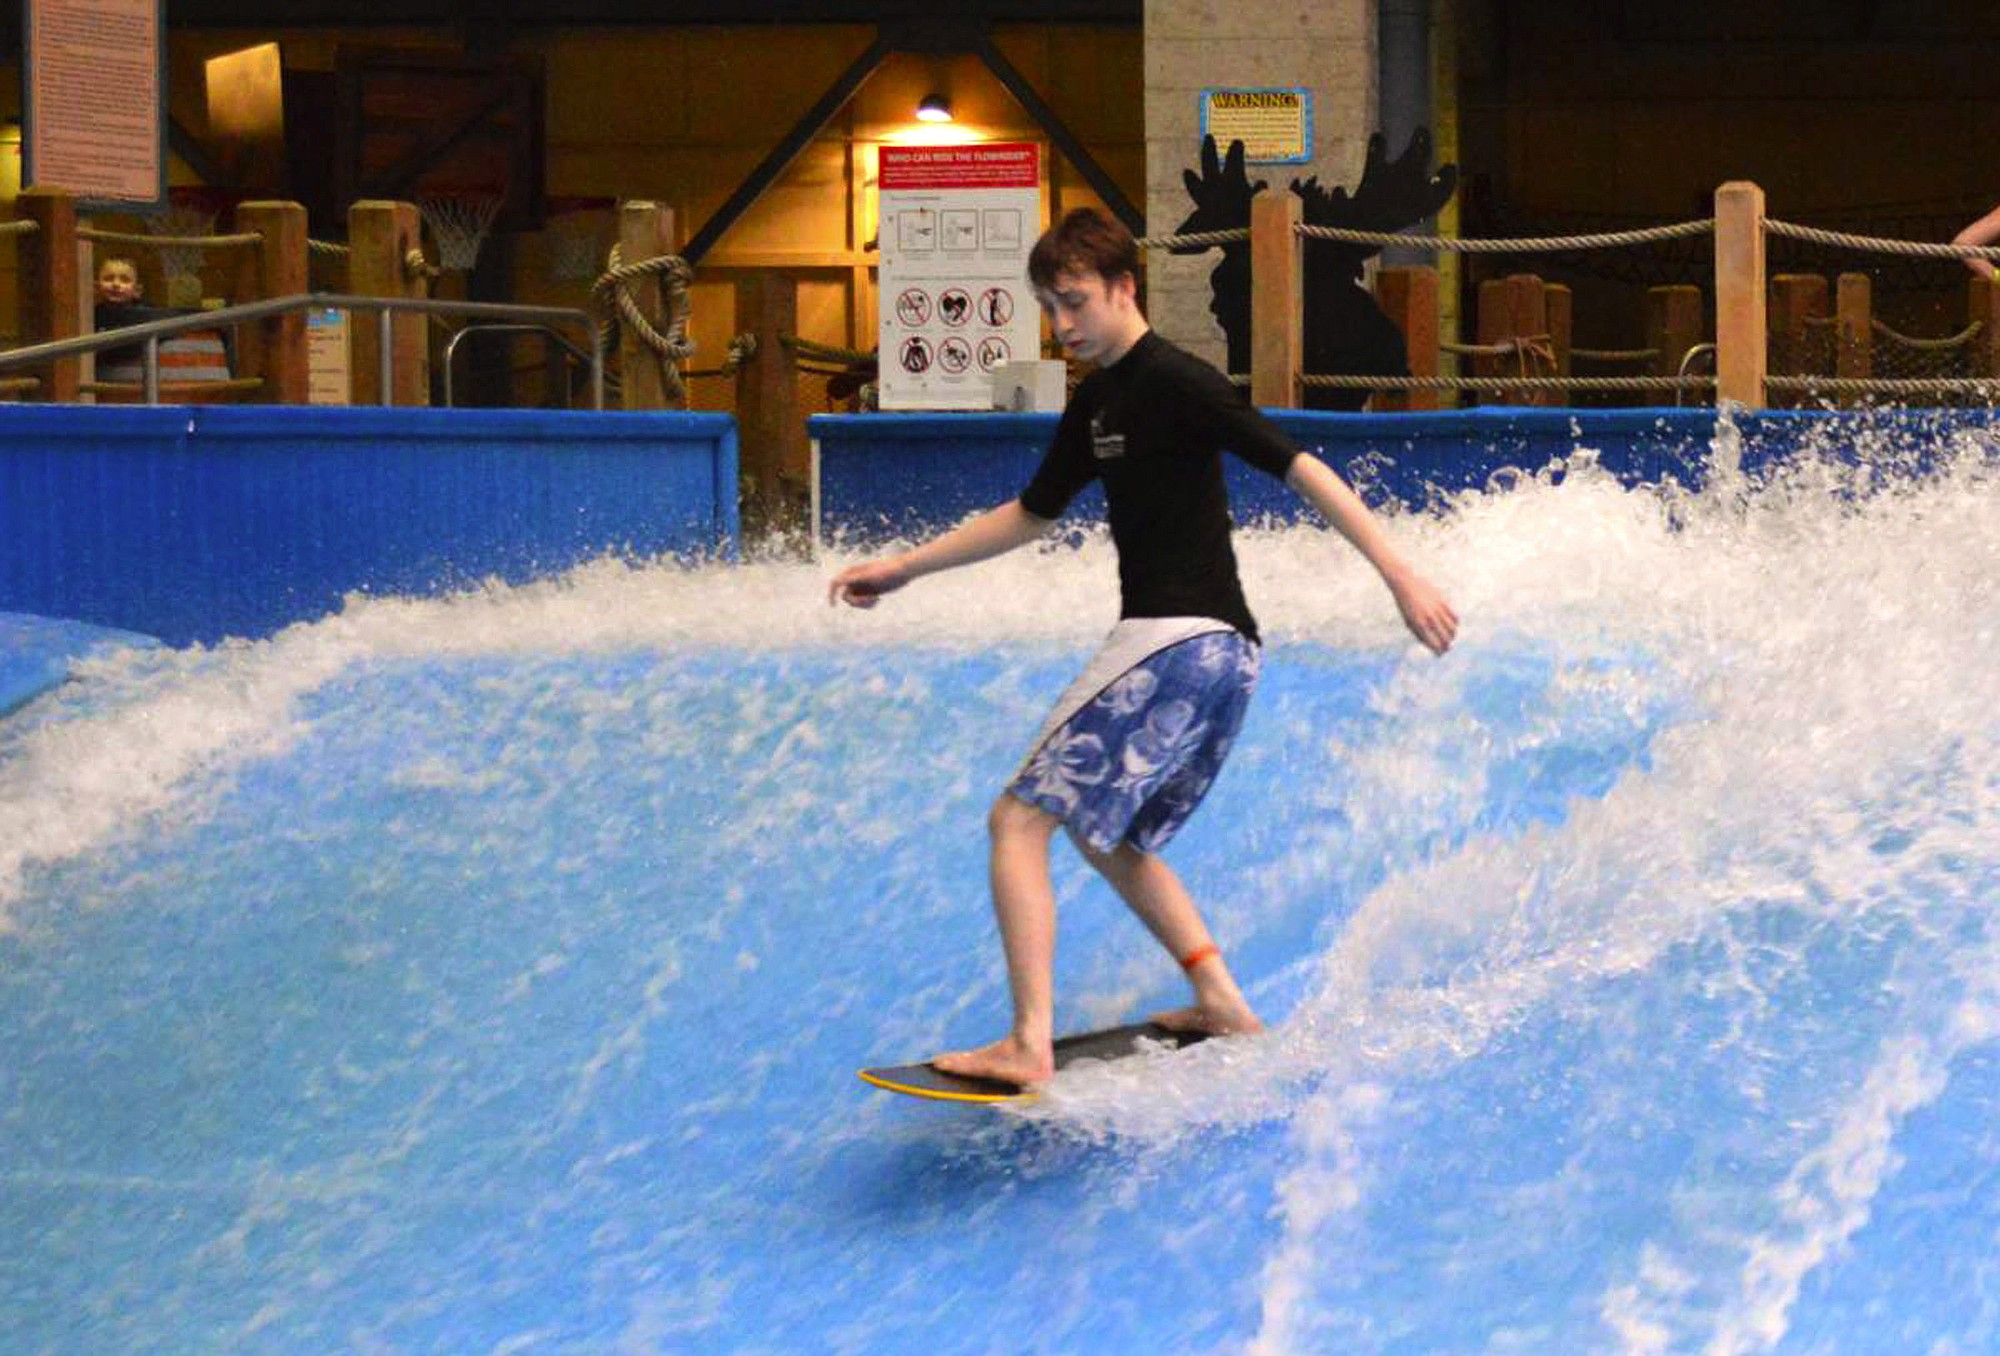 Silver Mountain's indoor water park lets visitors go from snowboard to surfboard in a matter of minutes.